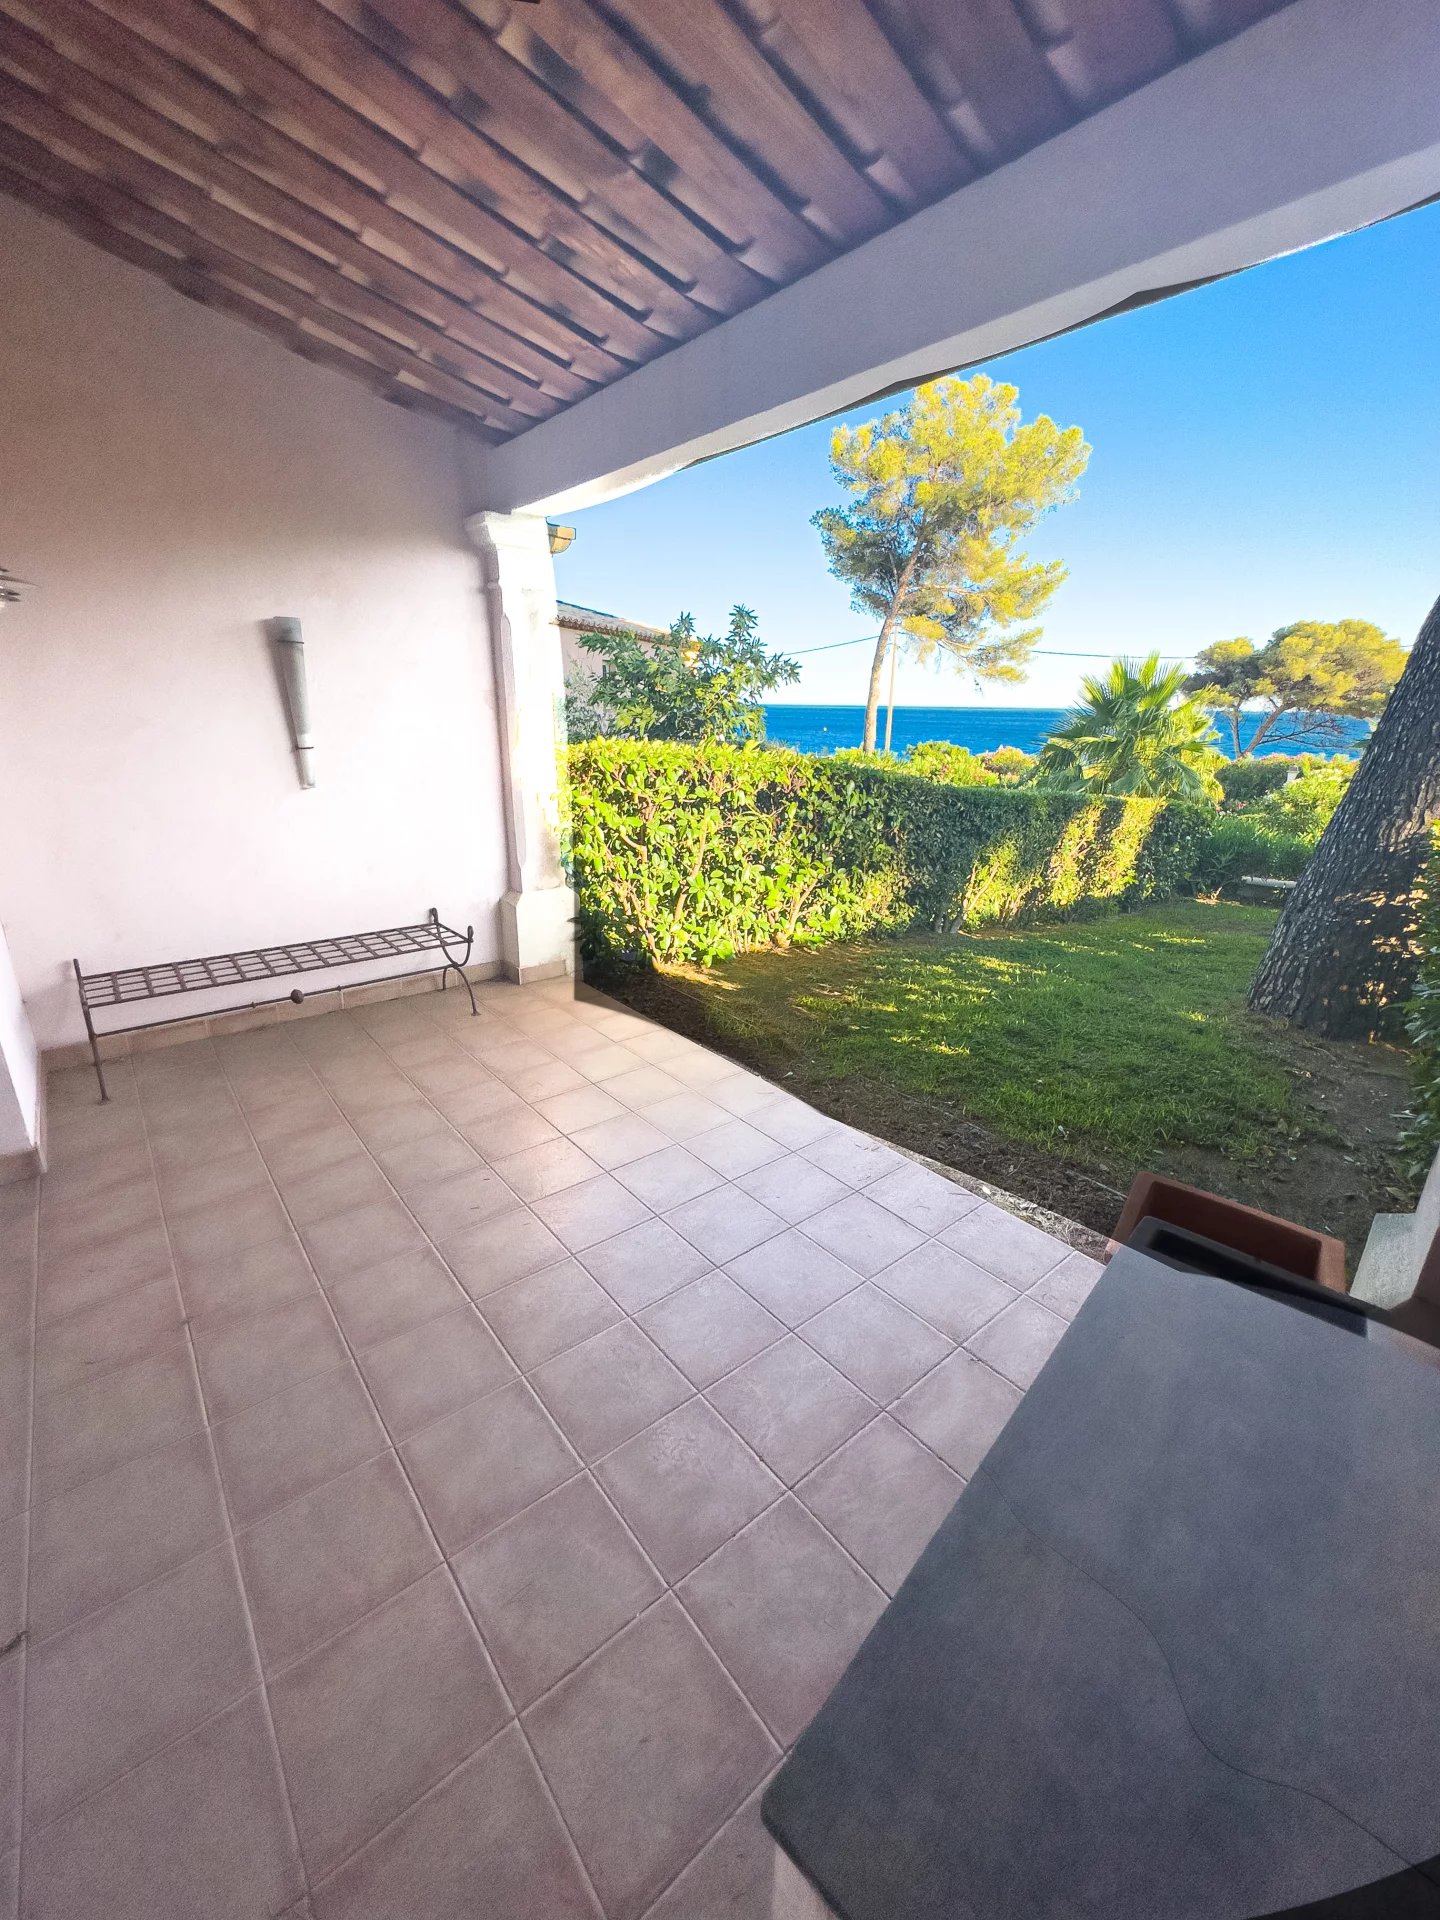 4-room "Bastidon" with panoramic sea view and private access to the beach